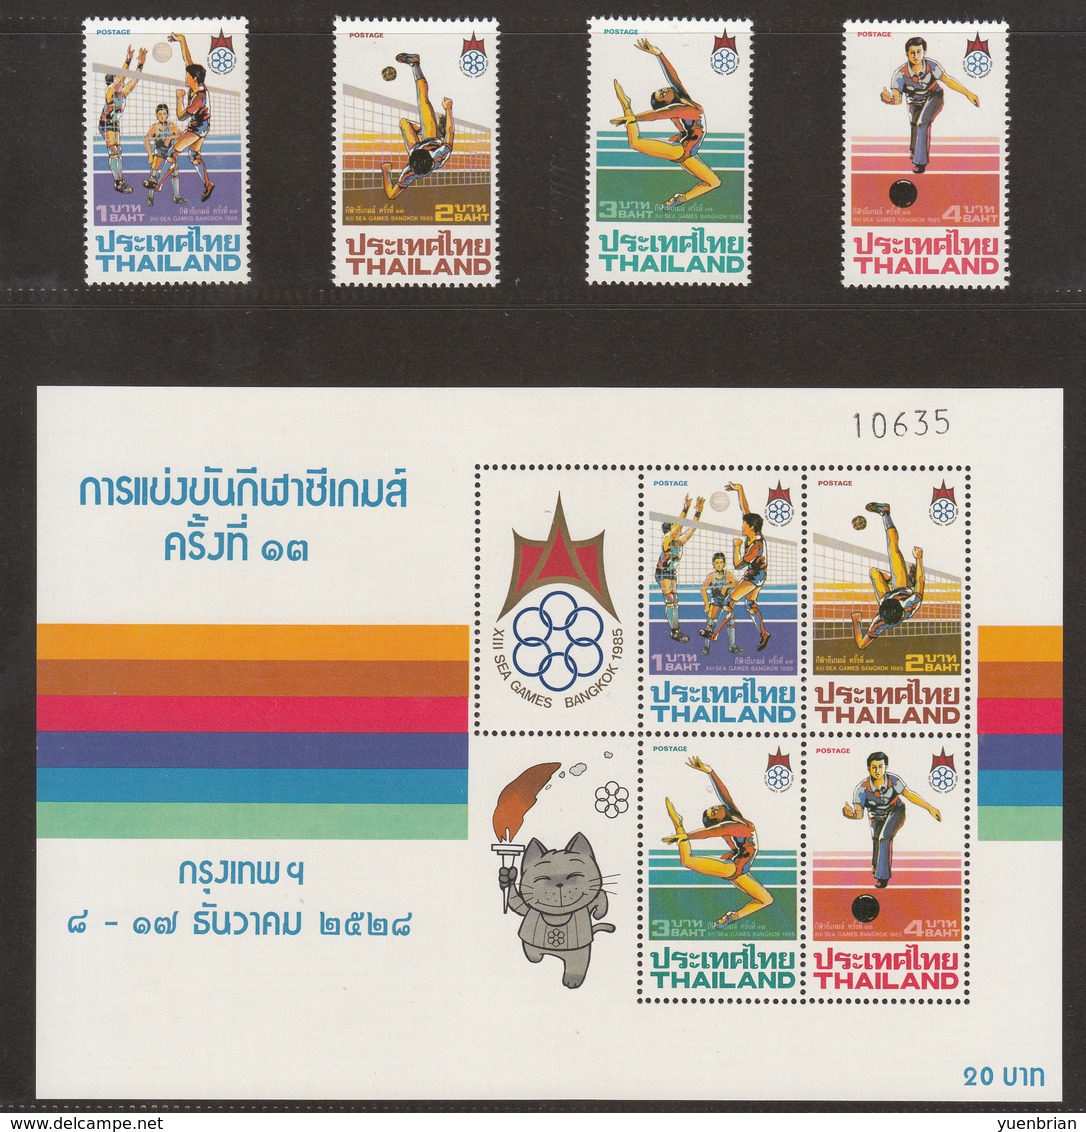 Thailand 1985 S/S + Set Of 4v Stamps, XIII SEA Games, Prefect Condition. - Thailand